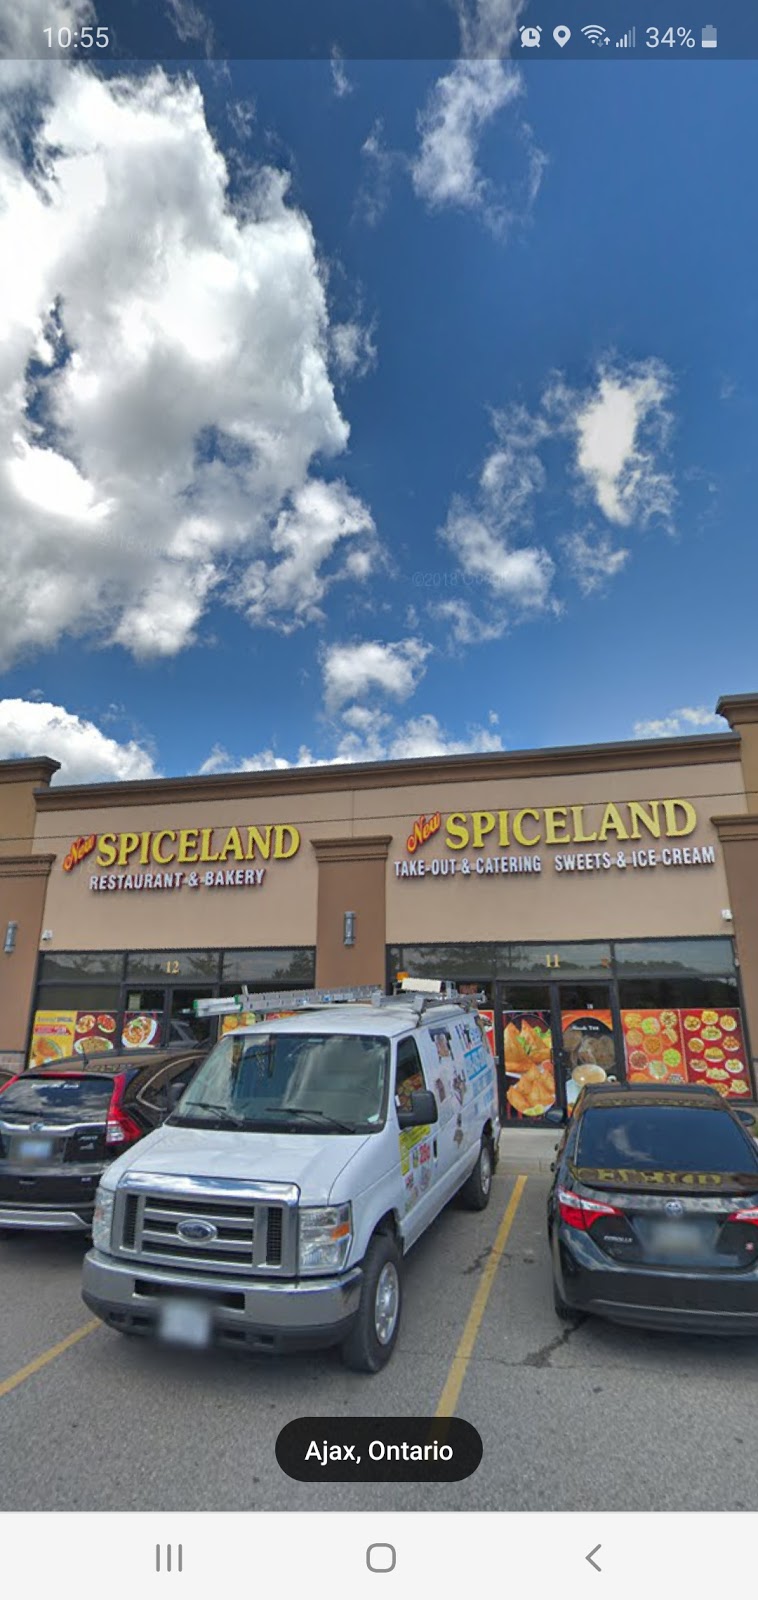 New Spiceland Restaurant / Take-Out & Sweets / Catering | restaurant | 1801 Harwood Ave N Unit 11 & 12, Ajax, ON L1T 0K8, Canada | 9054264445 OR +1 905-426-4445